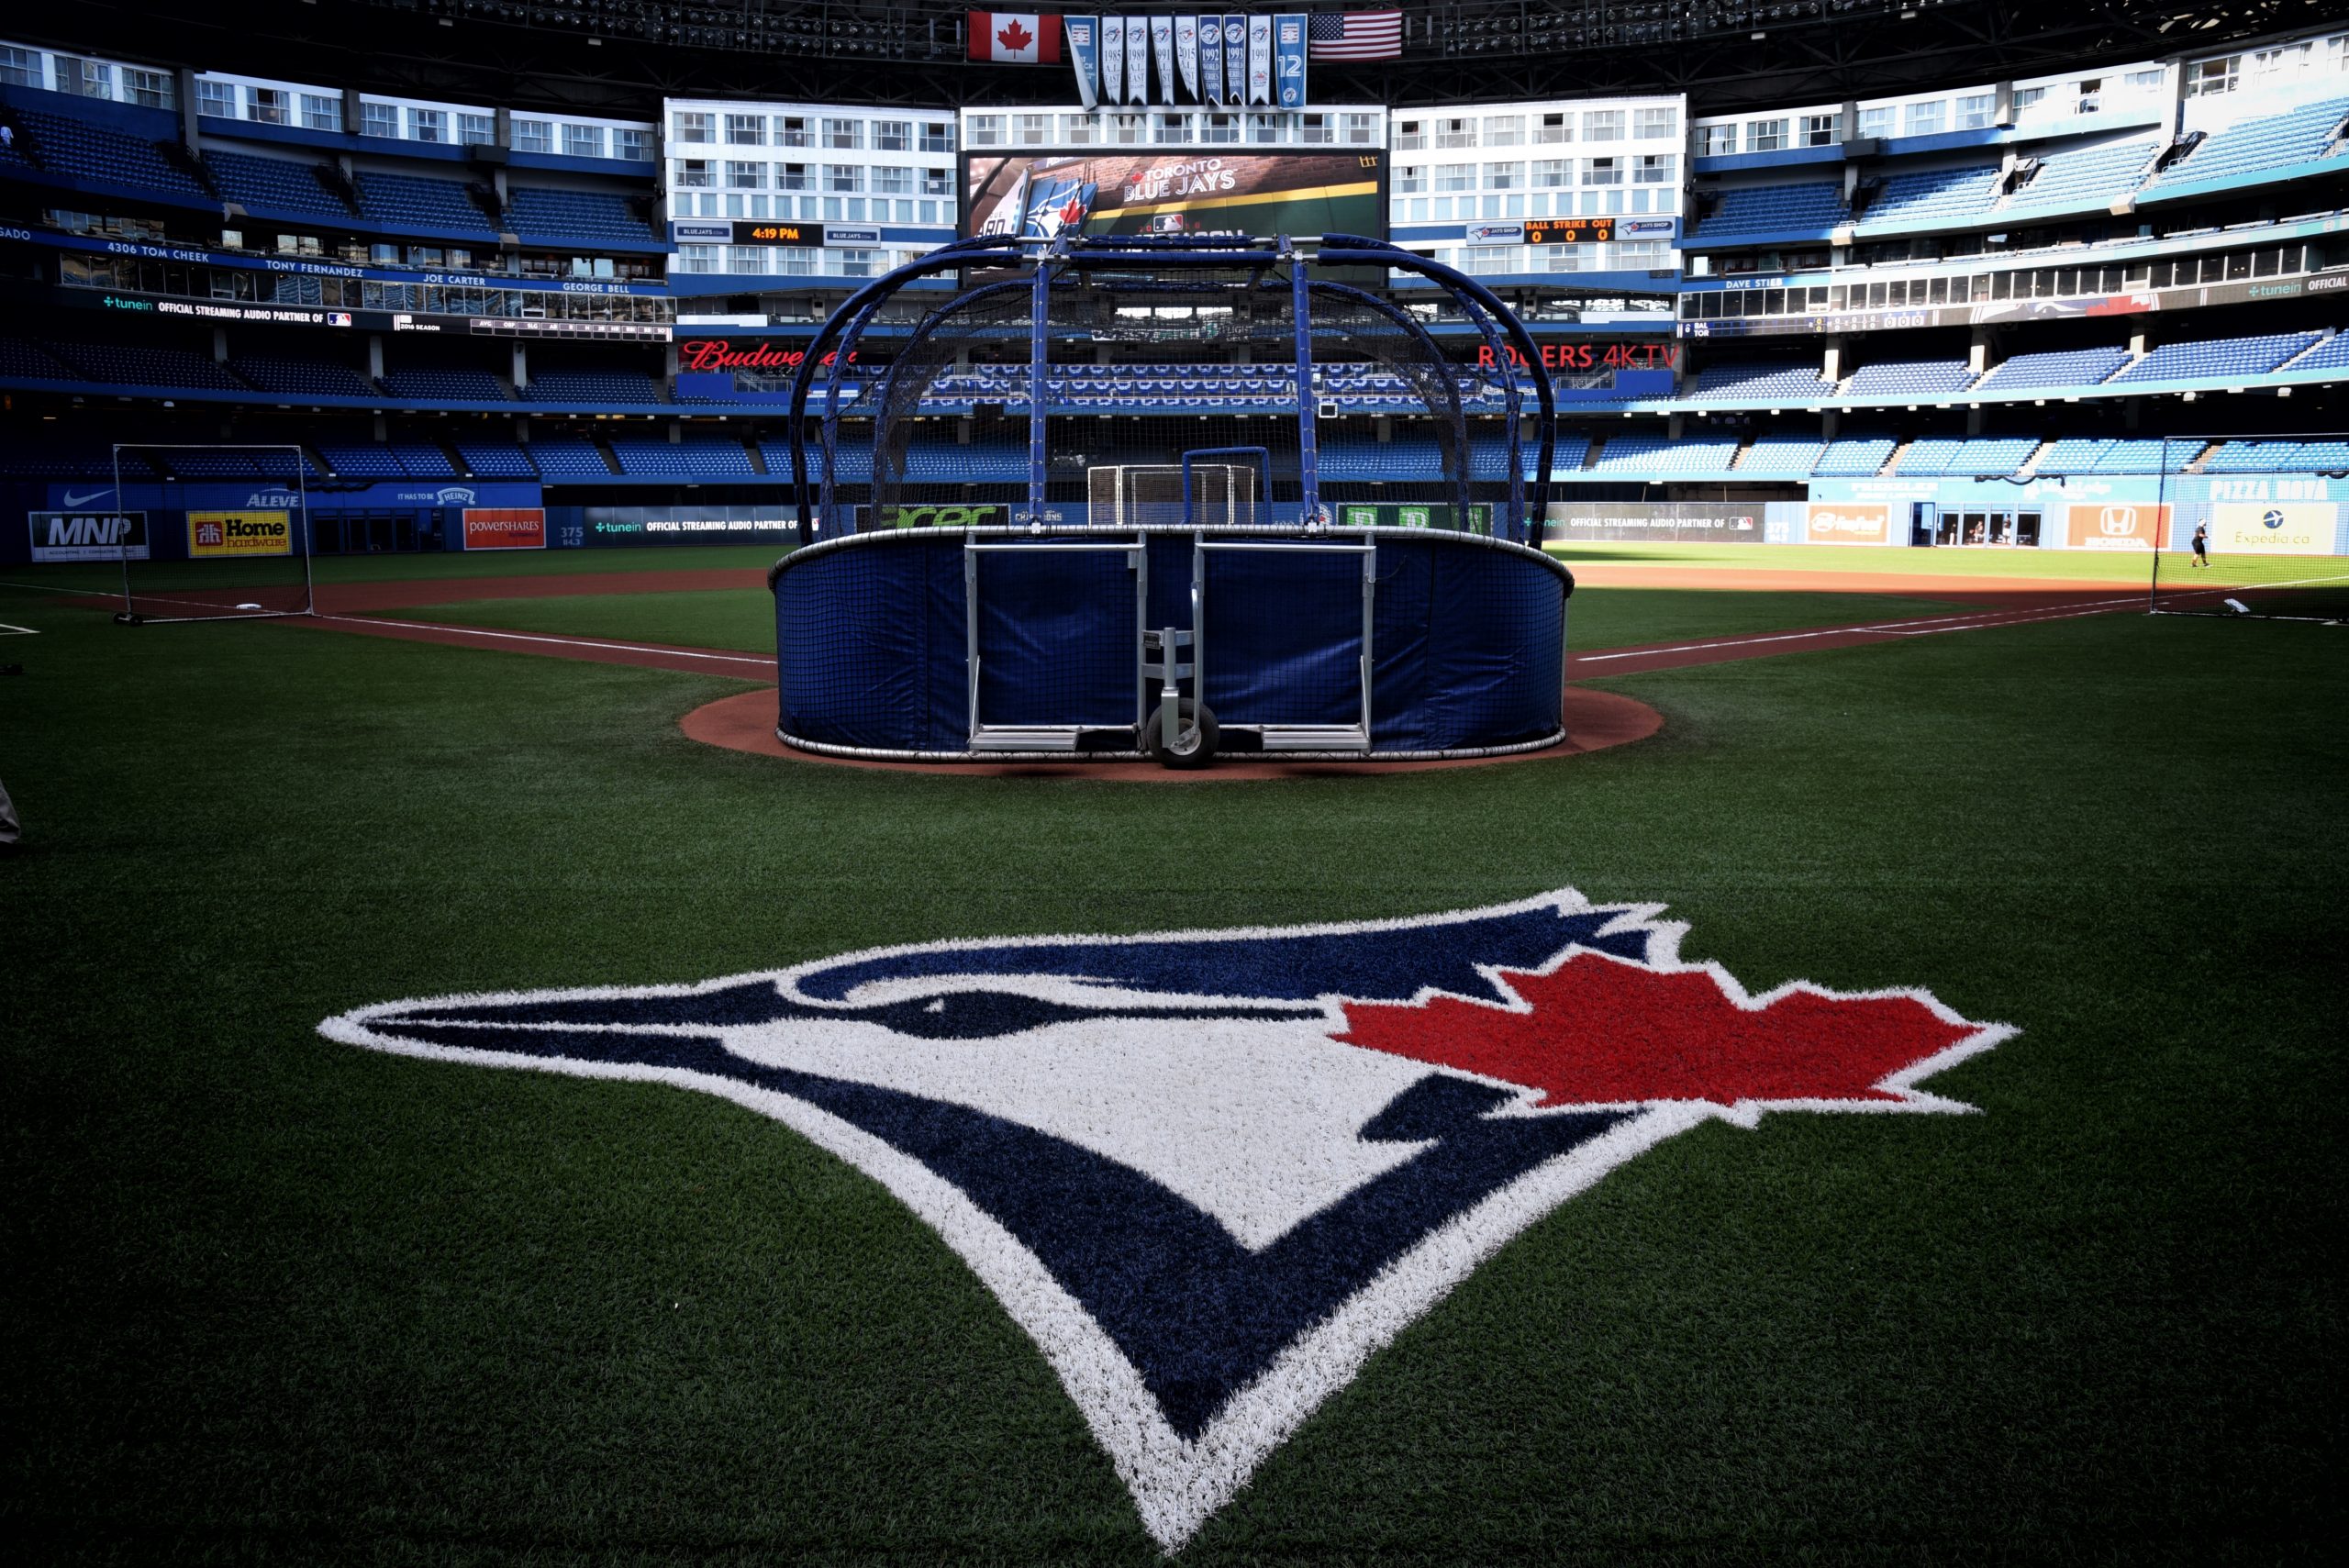 The-Rogers-Centre-before-the-Toronto-Blue-Jays-take-on-the-Baltimore-Orioles-tonight